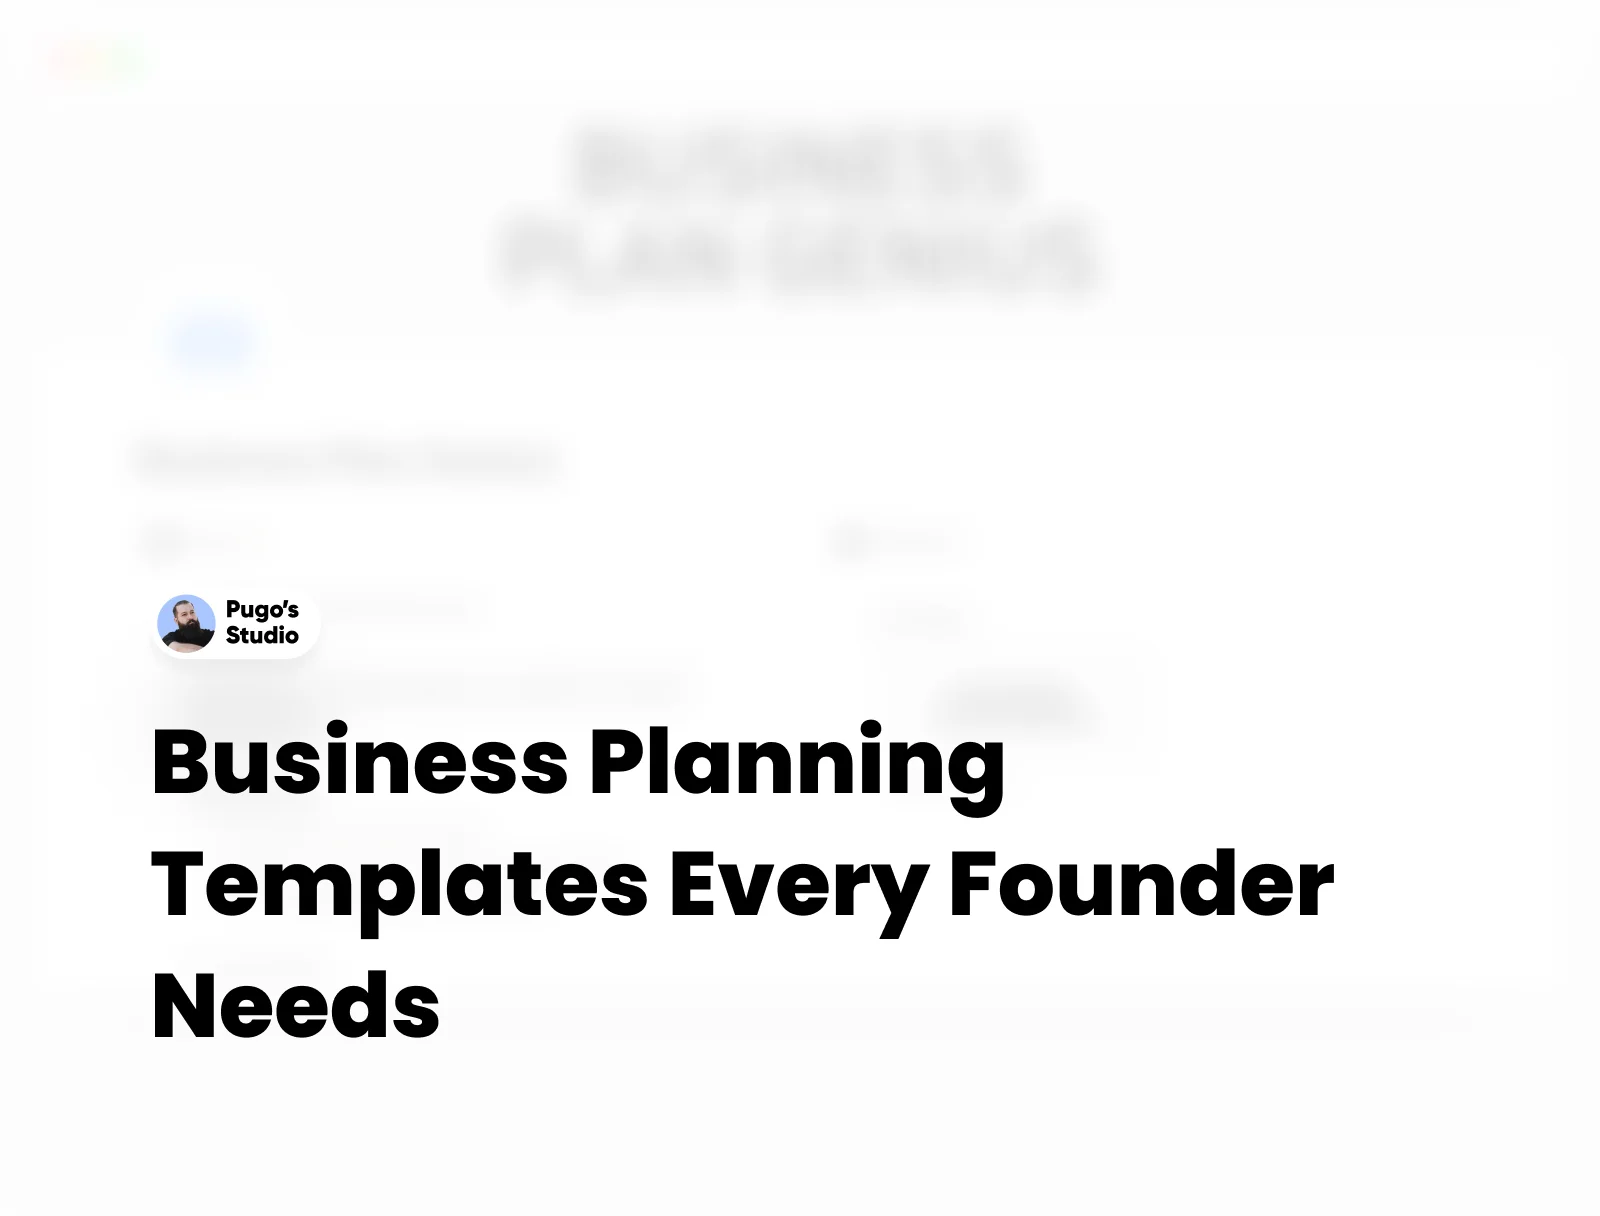 10+ Business Planning Templates Every Founder Needs